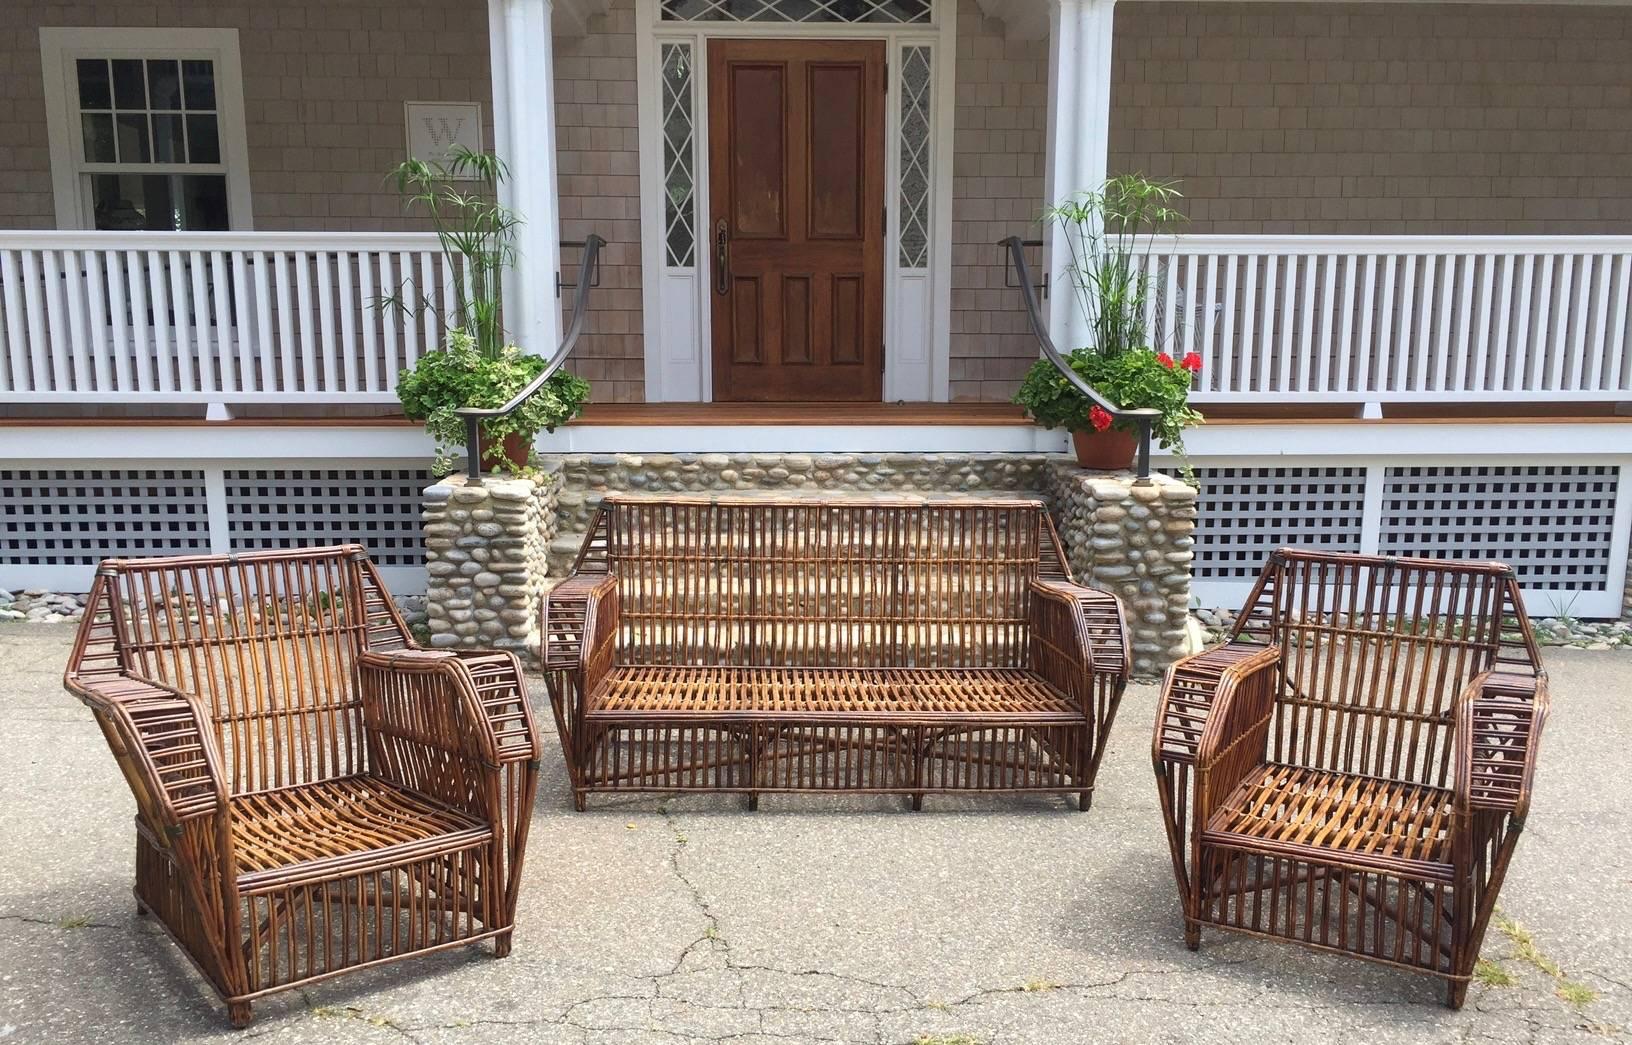 Antique stick rattan set in original natural finish. Chairs have integrated cup holders and magazine pockets.
Sofa measures 68